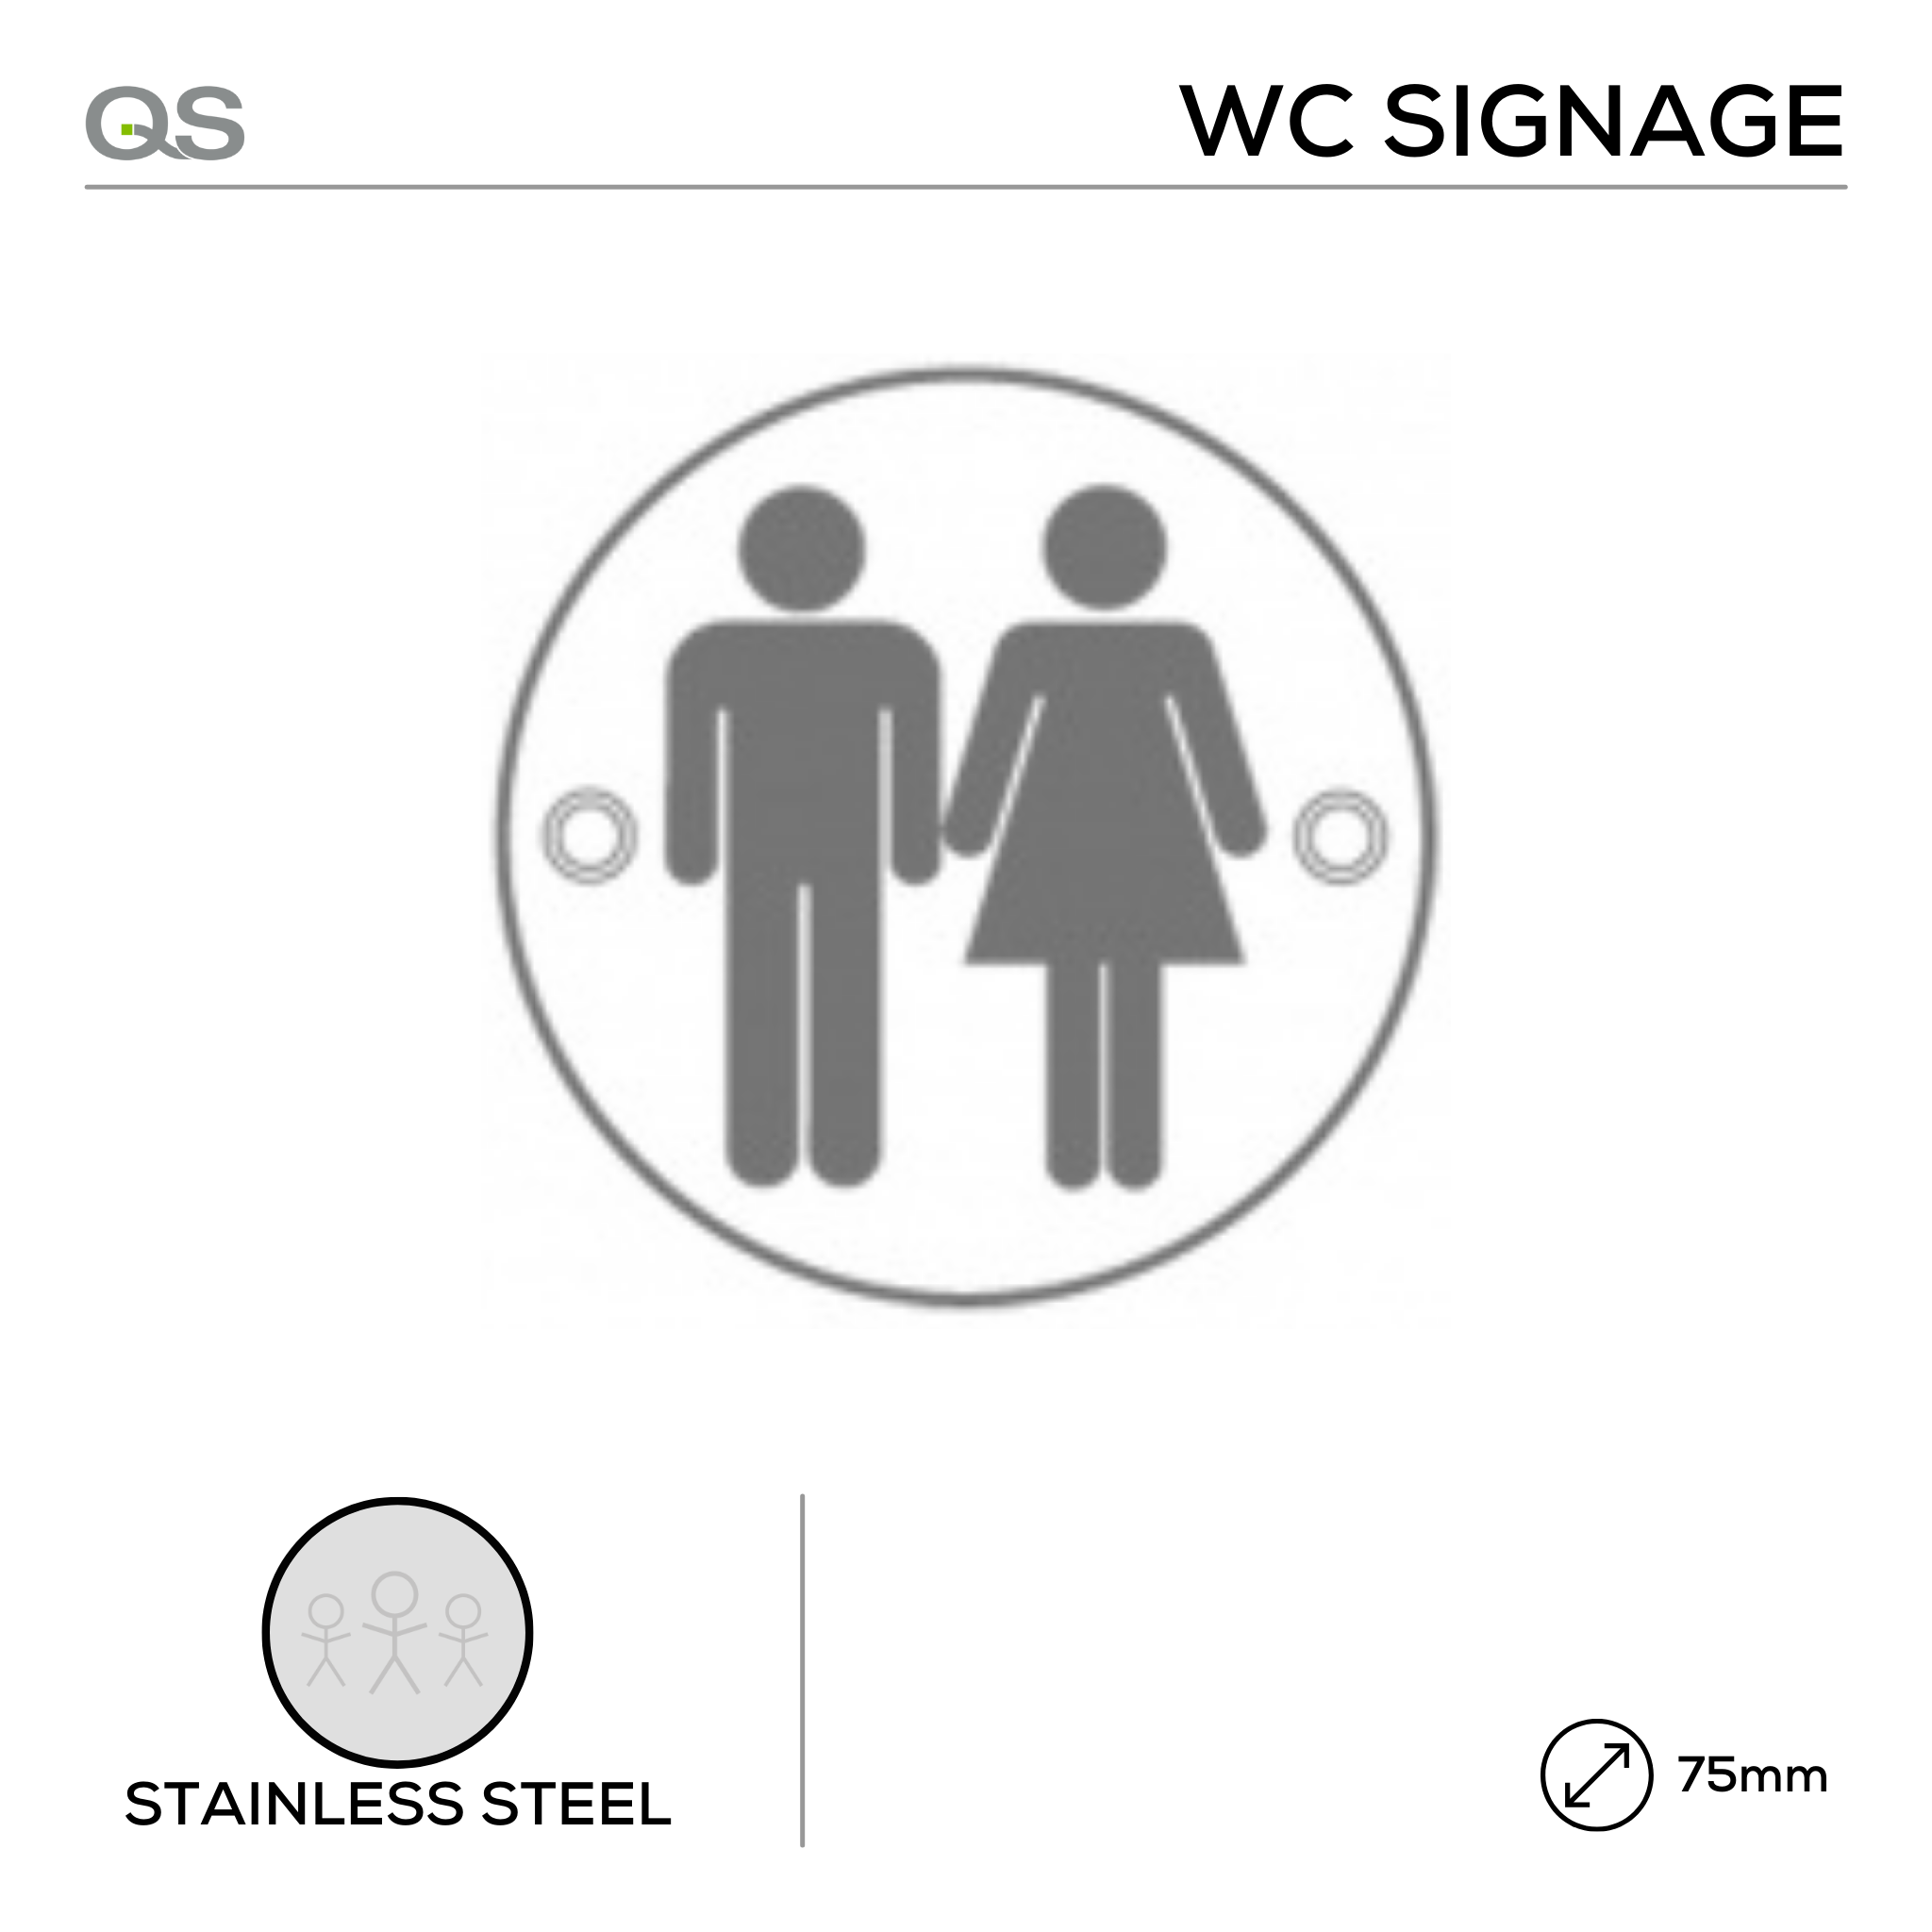 Male and Female, Round Engraved Sign, 75mm, Stainless Steel, QS